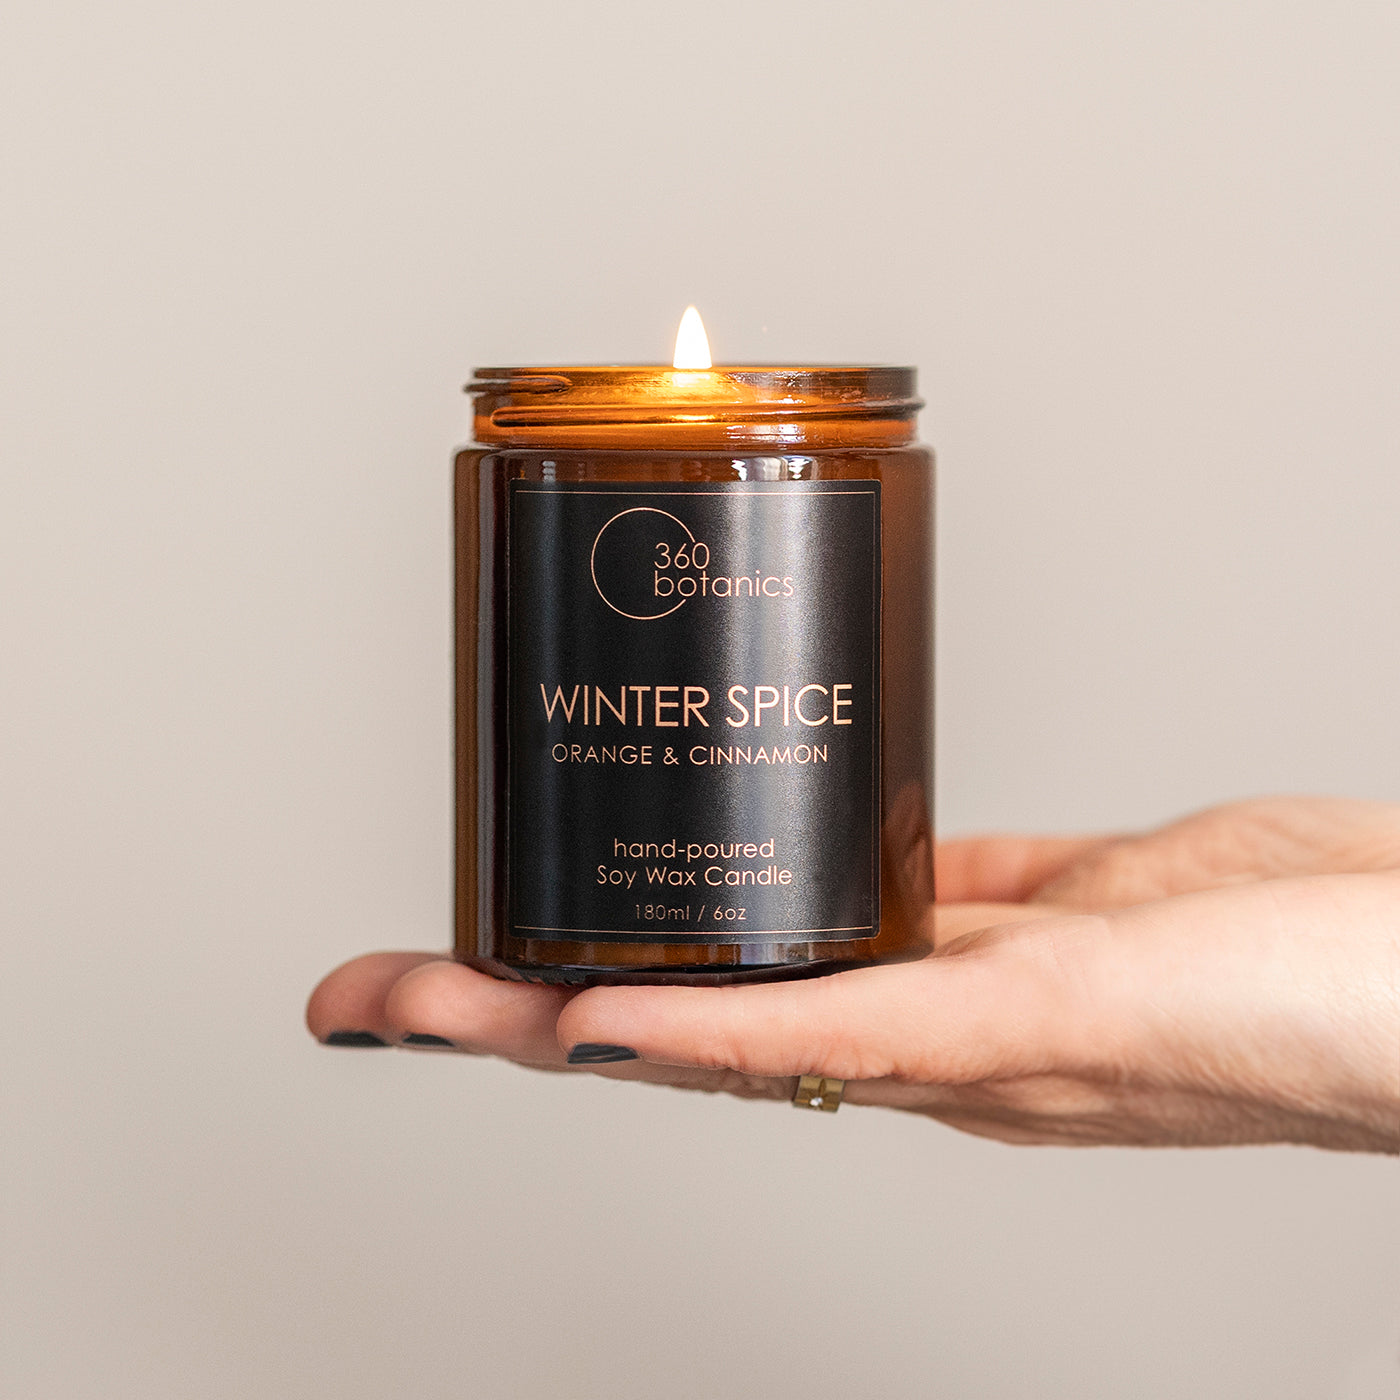 winter spice candle dark label on amber jar, held on hand white background